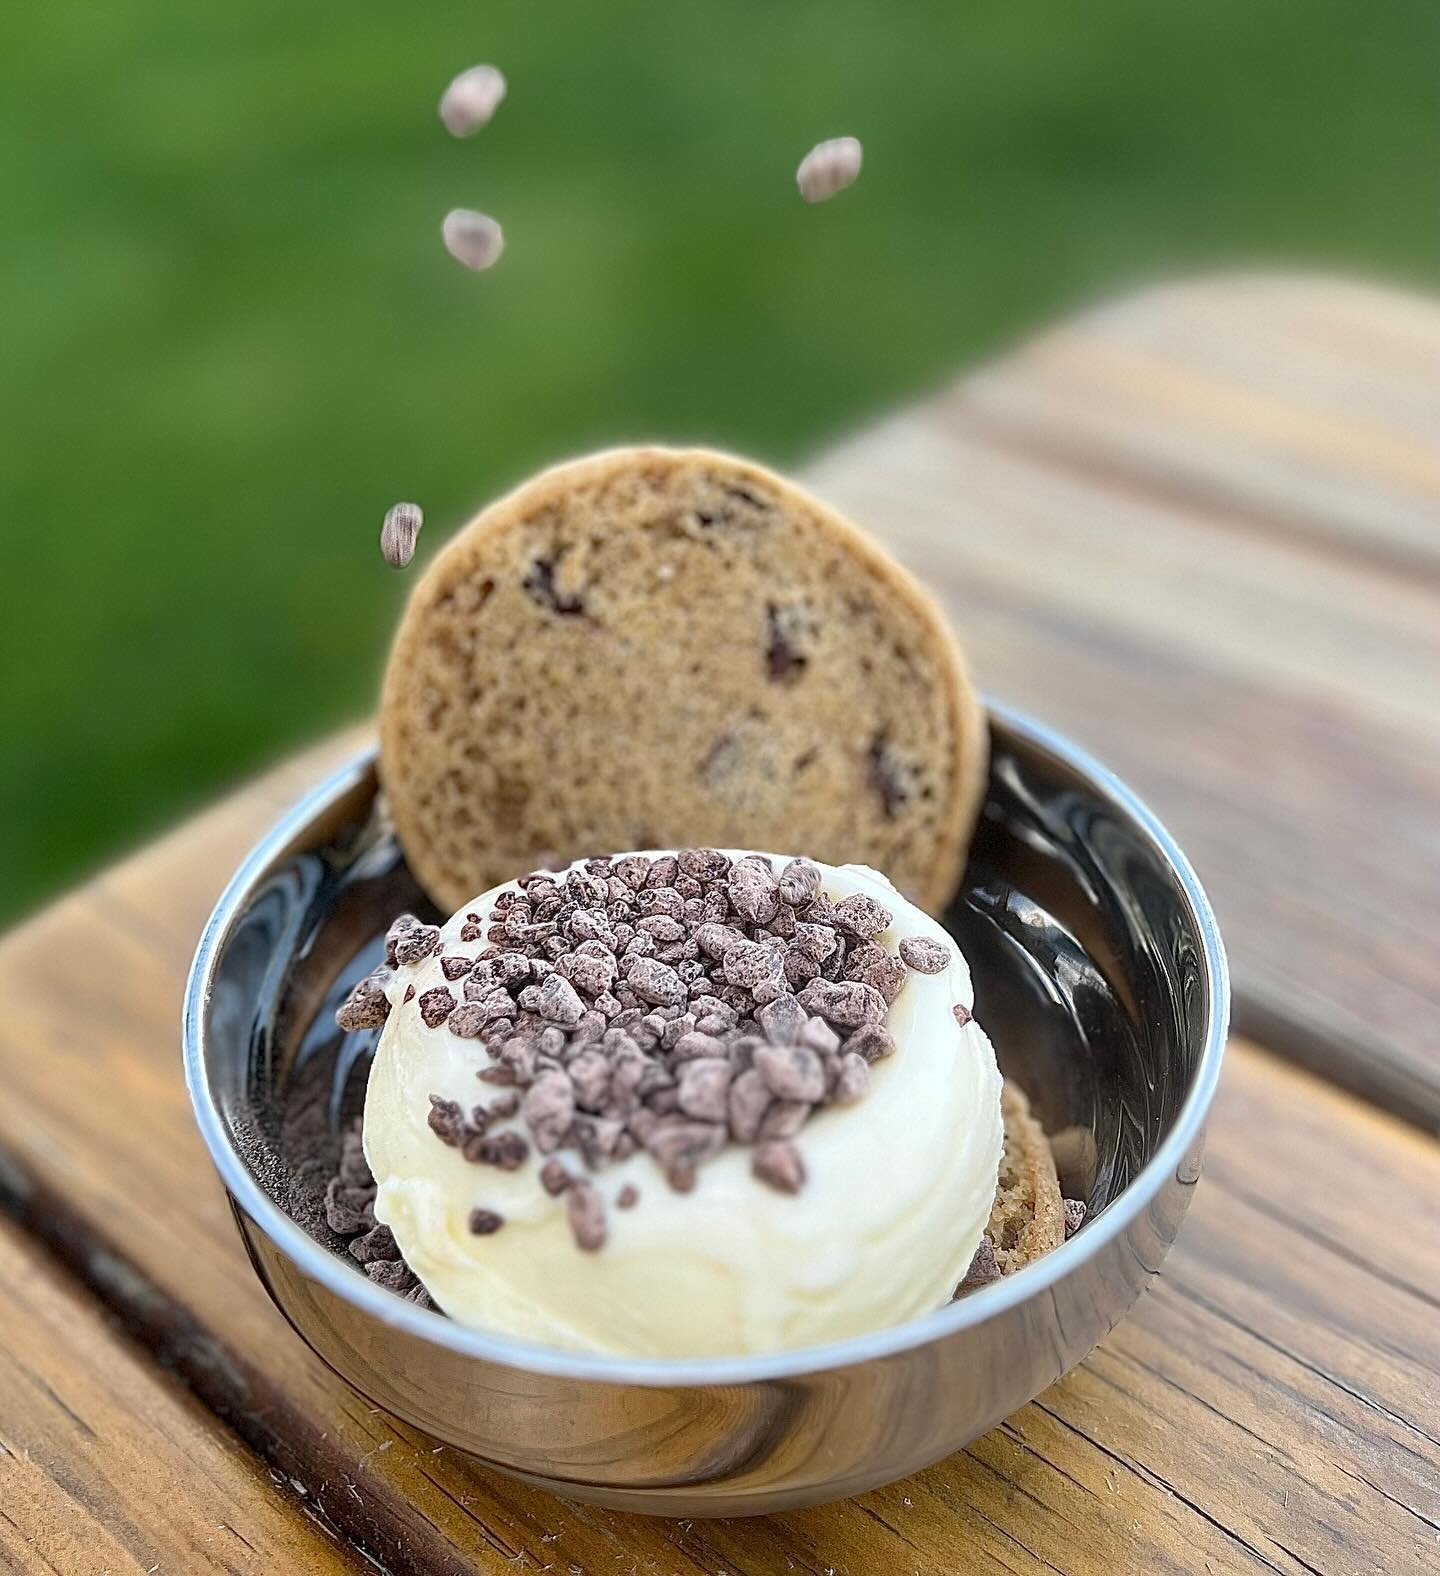 You know the crunchy chocolate bits that cover our Chocoholic Sundae? (Ahem, see our last post). Well, we have a staff favorite secret for you. 

Order the off-menu Crunchy Cookie Sandwich, and you&rsquo;ll get a layer of those yummy crunchy bits nes